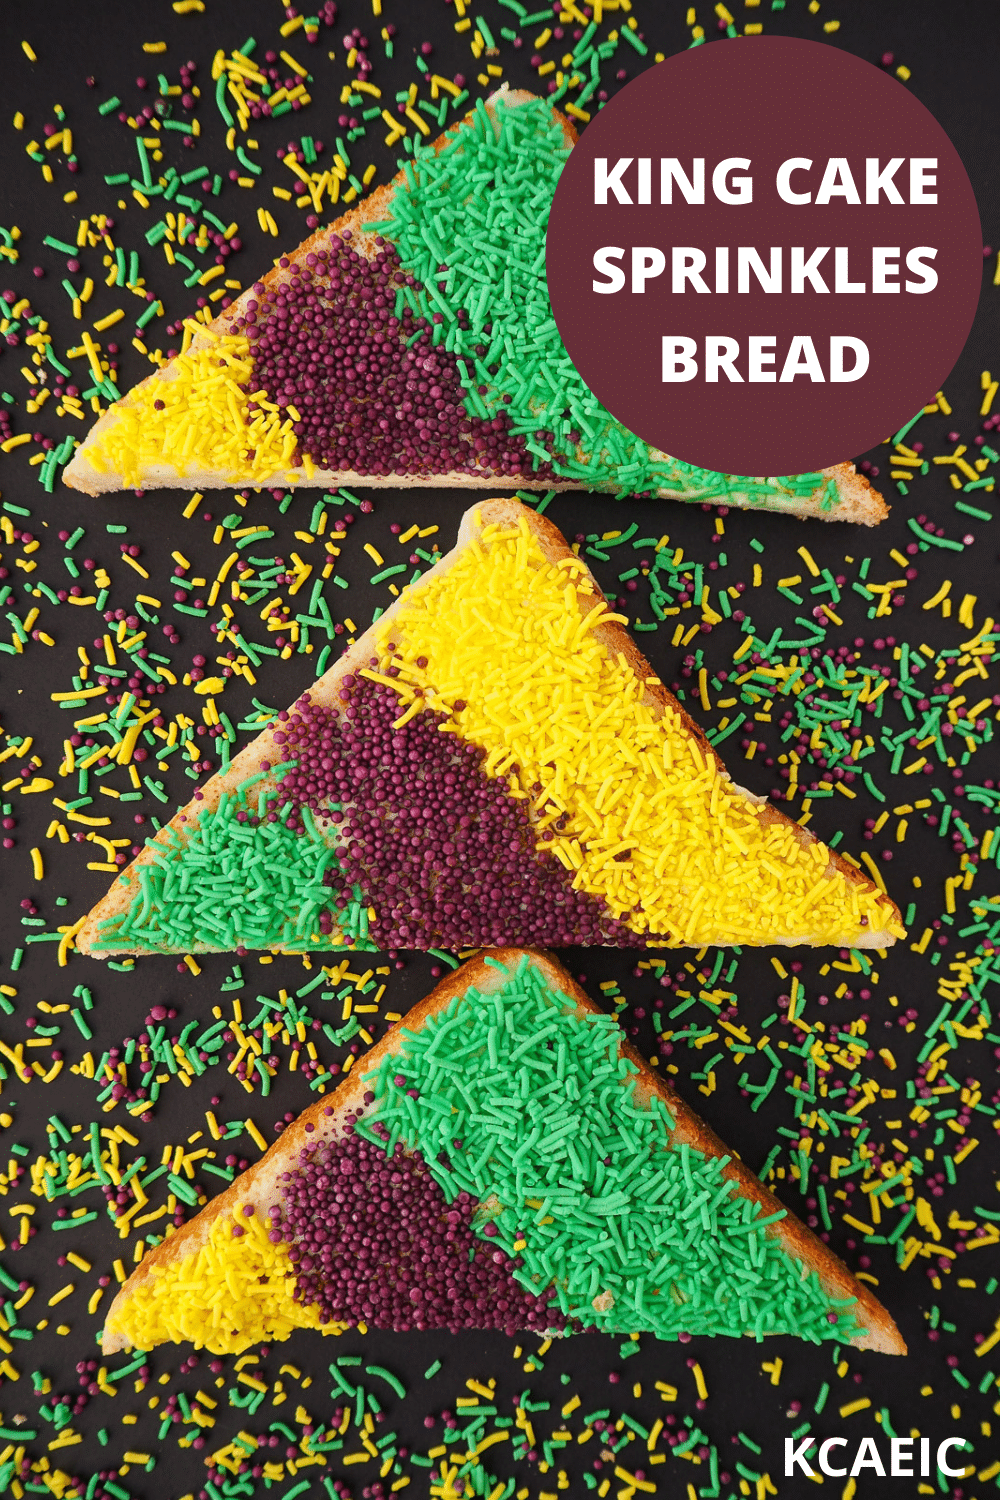 Vertical line of three slices of King cake sprinkles bread, surrounded by sprinkles, with text overlay King cake sprinkles bread, KCAEIC.